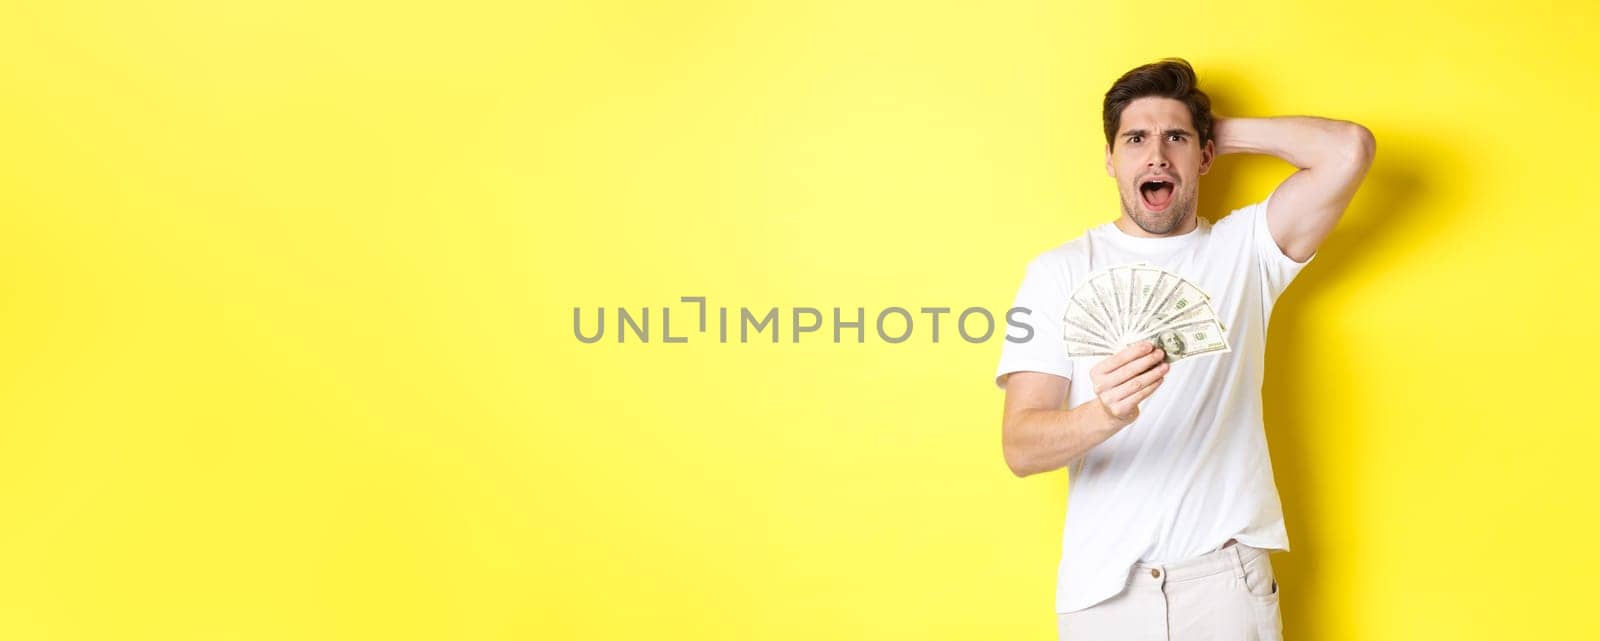 Frustrated man holding money, shouting and panicking, standing over yellow background by Benzoix